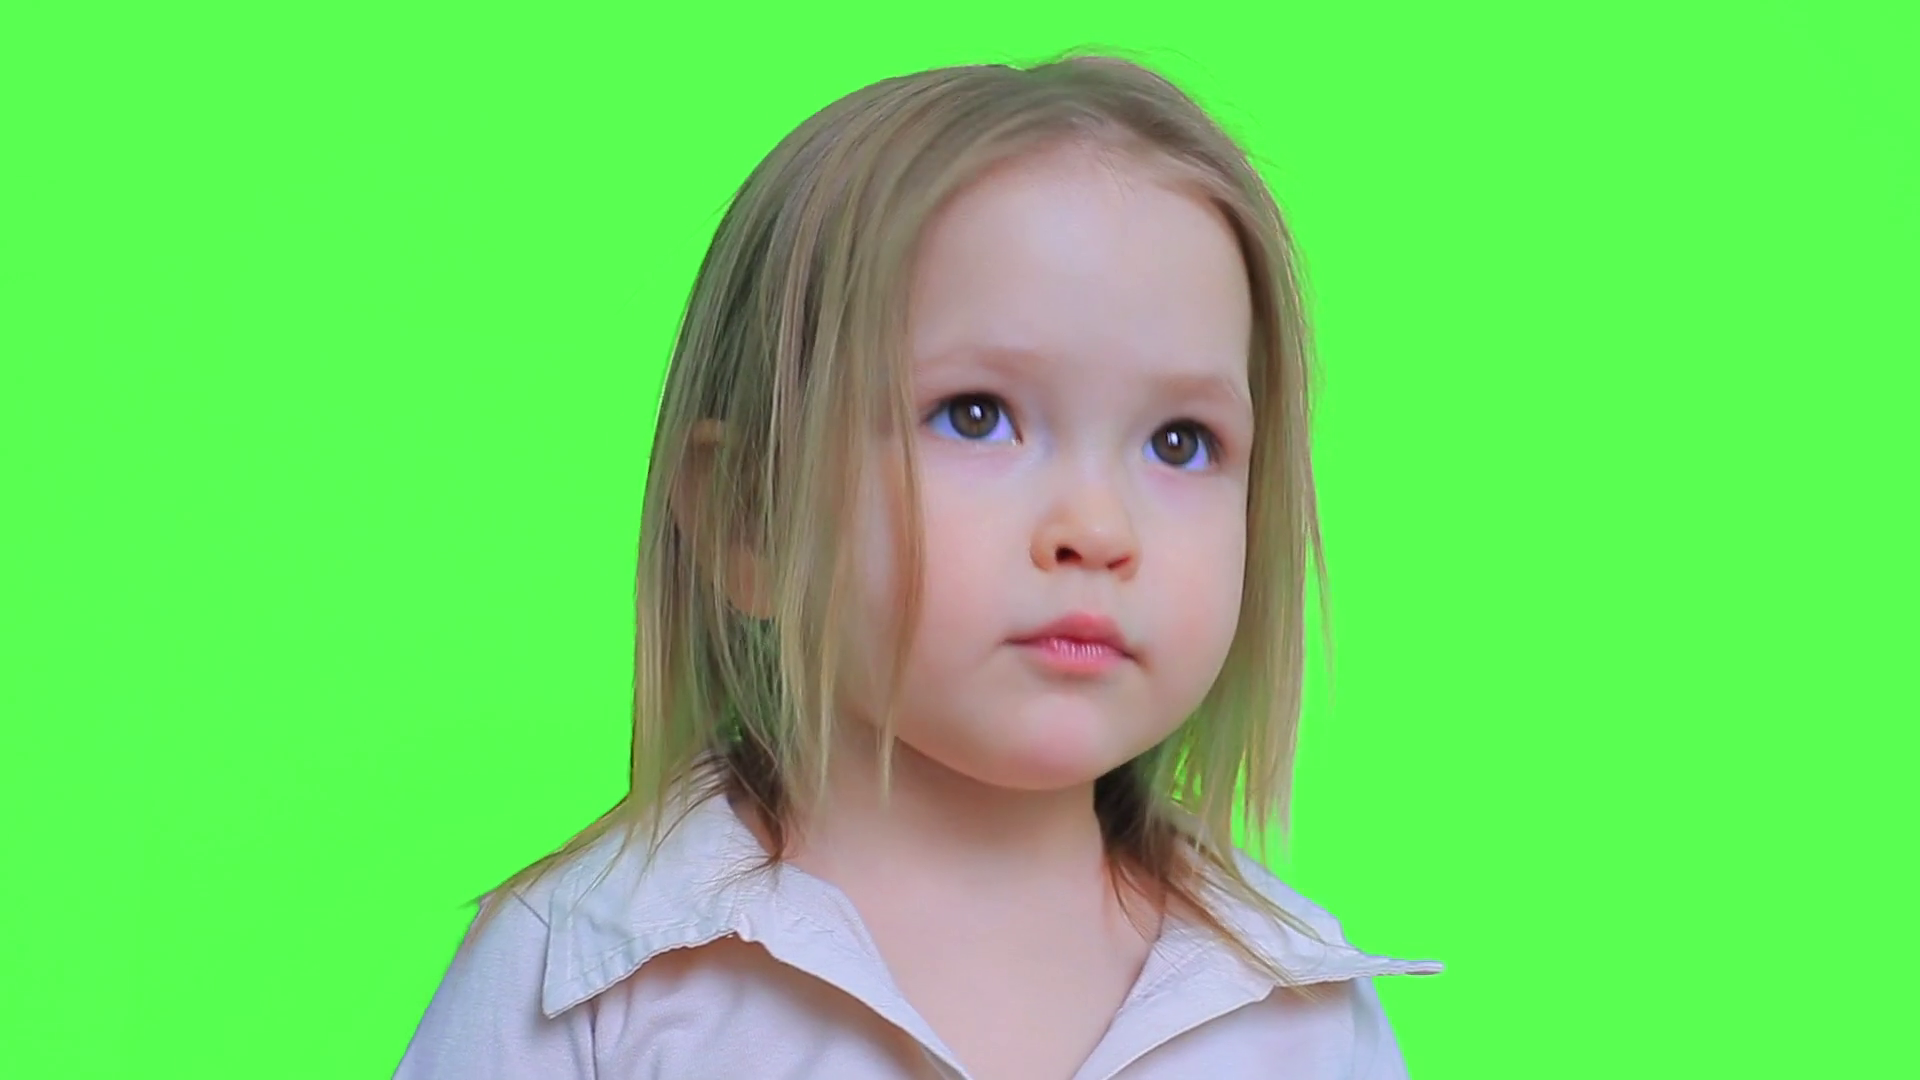 Little Blonde Girl Looks up and Surprised on a Green Screen Stock ...